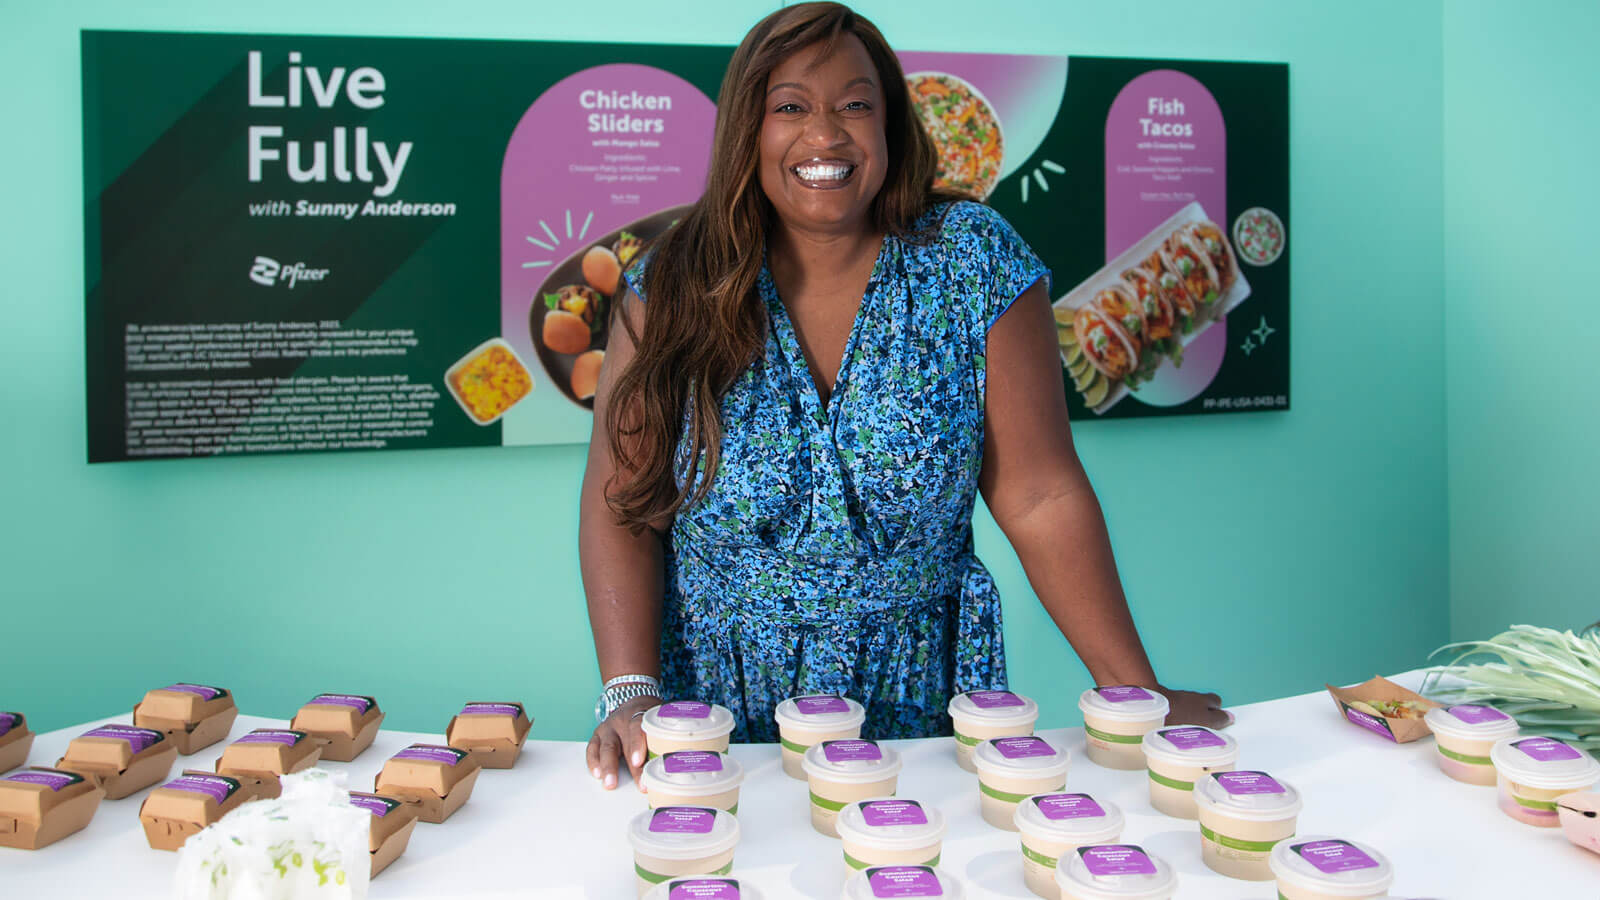 Sunny Anderson posing with food on the table